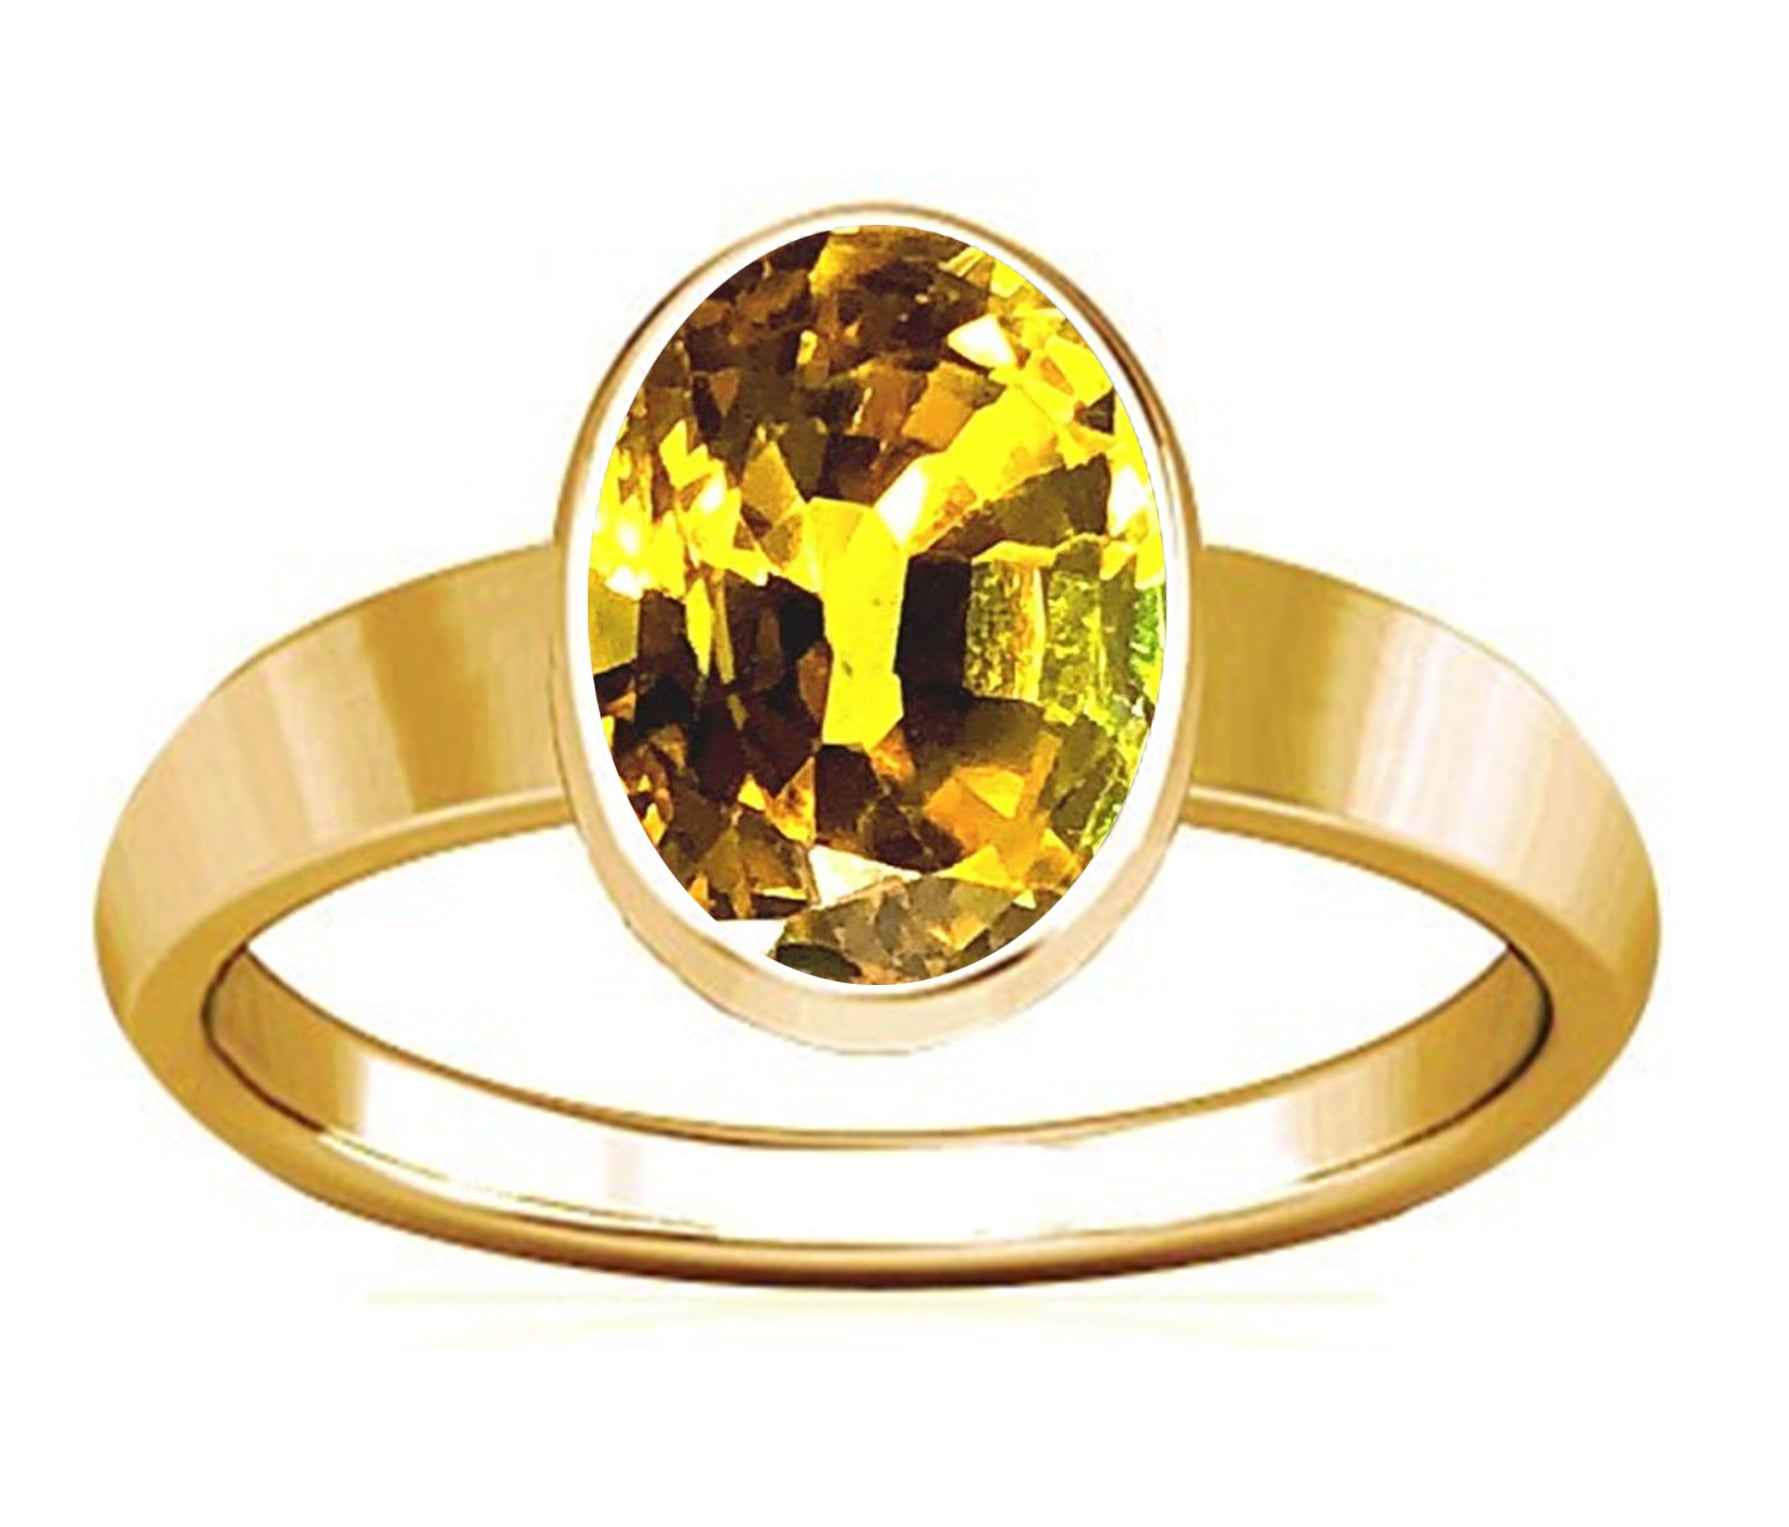 Buy JEMSPRIME 9.25 Ratti Pukhraj Stone Original Certified Yellow Sapphire  Gemstone Gold Finger Adjustable Woman Man Ring With Lab Certificate at  Amazon.in